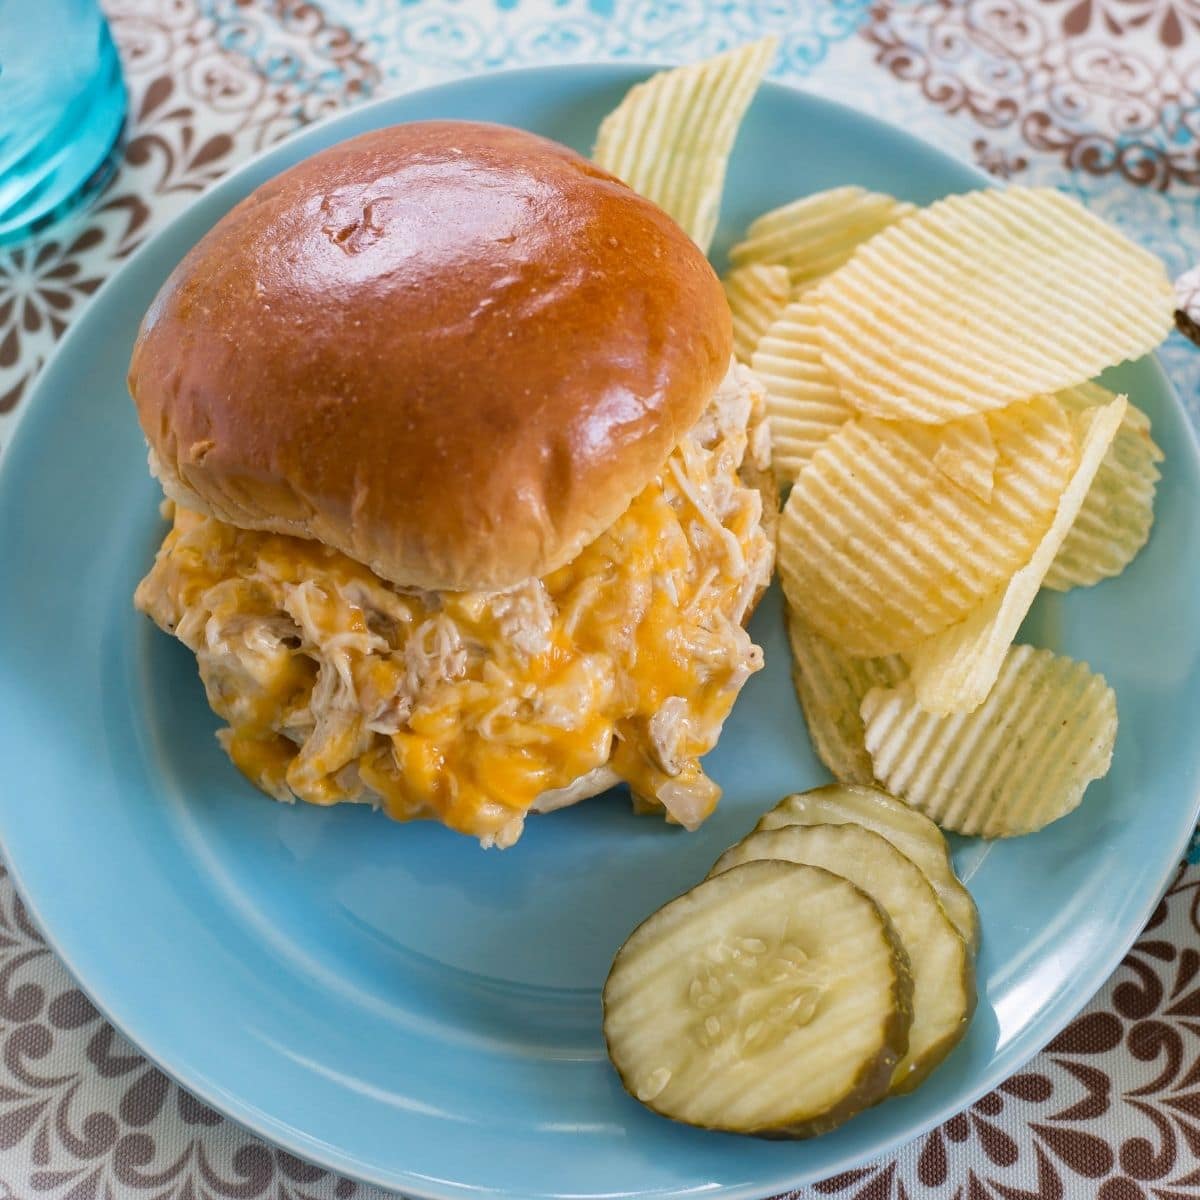 Cheesy chicken sandwich with chips and pickles on a plate.